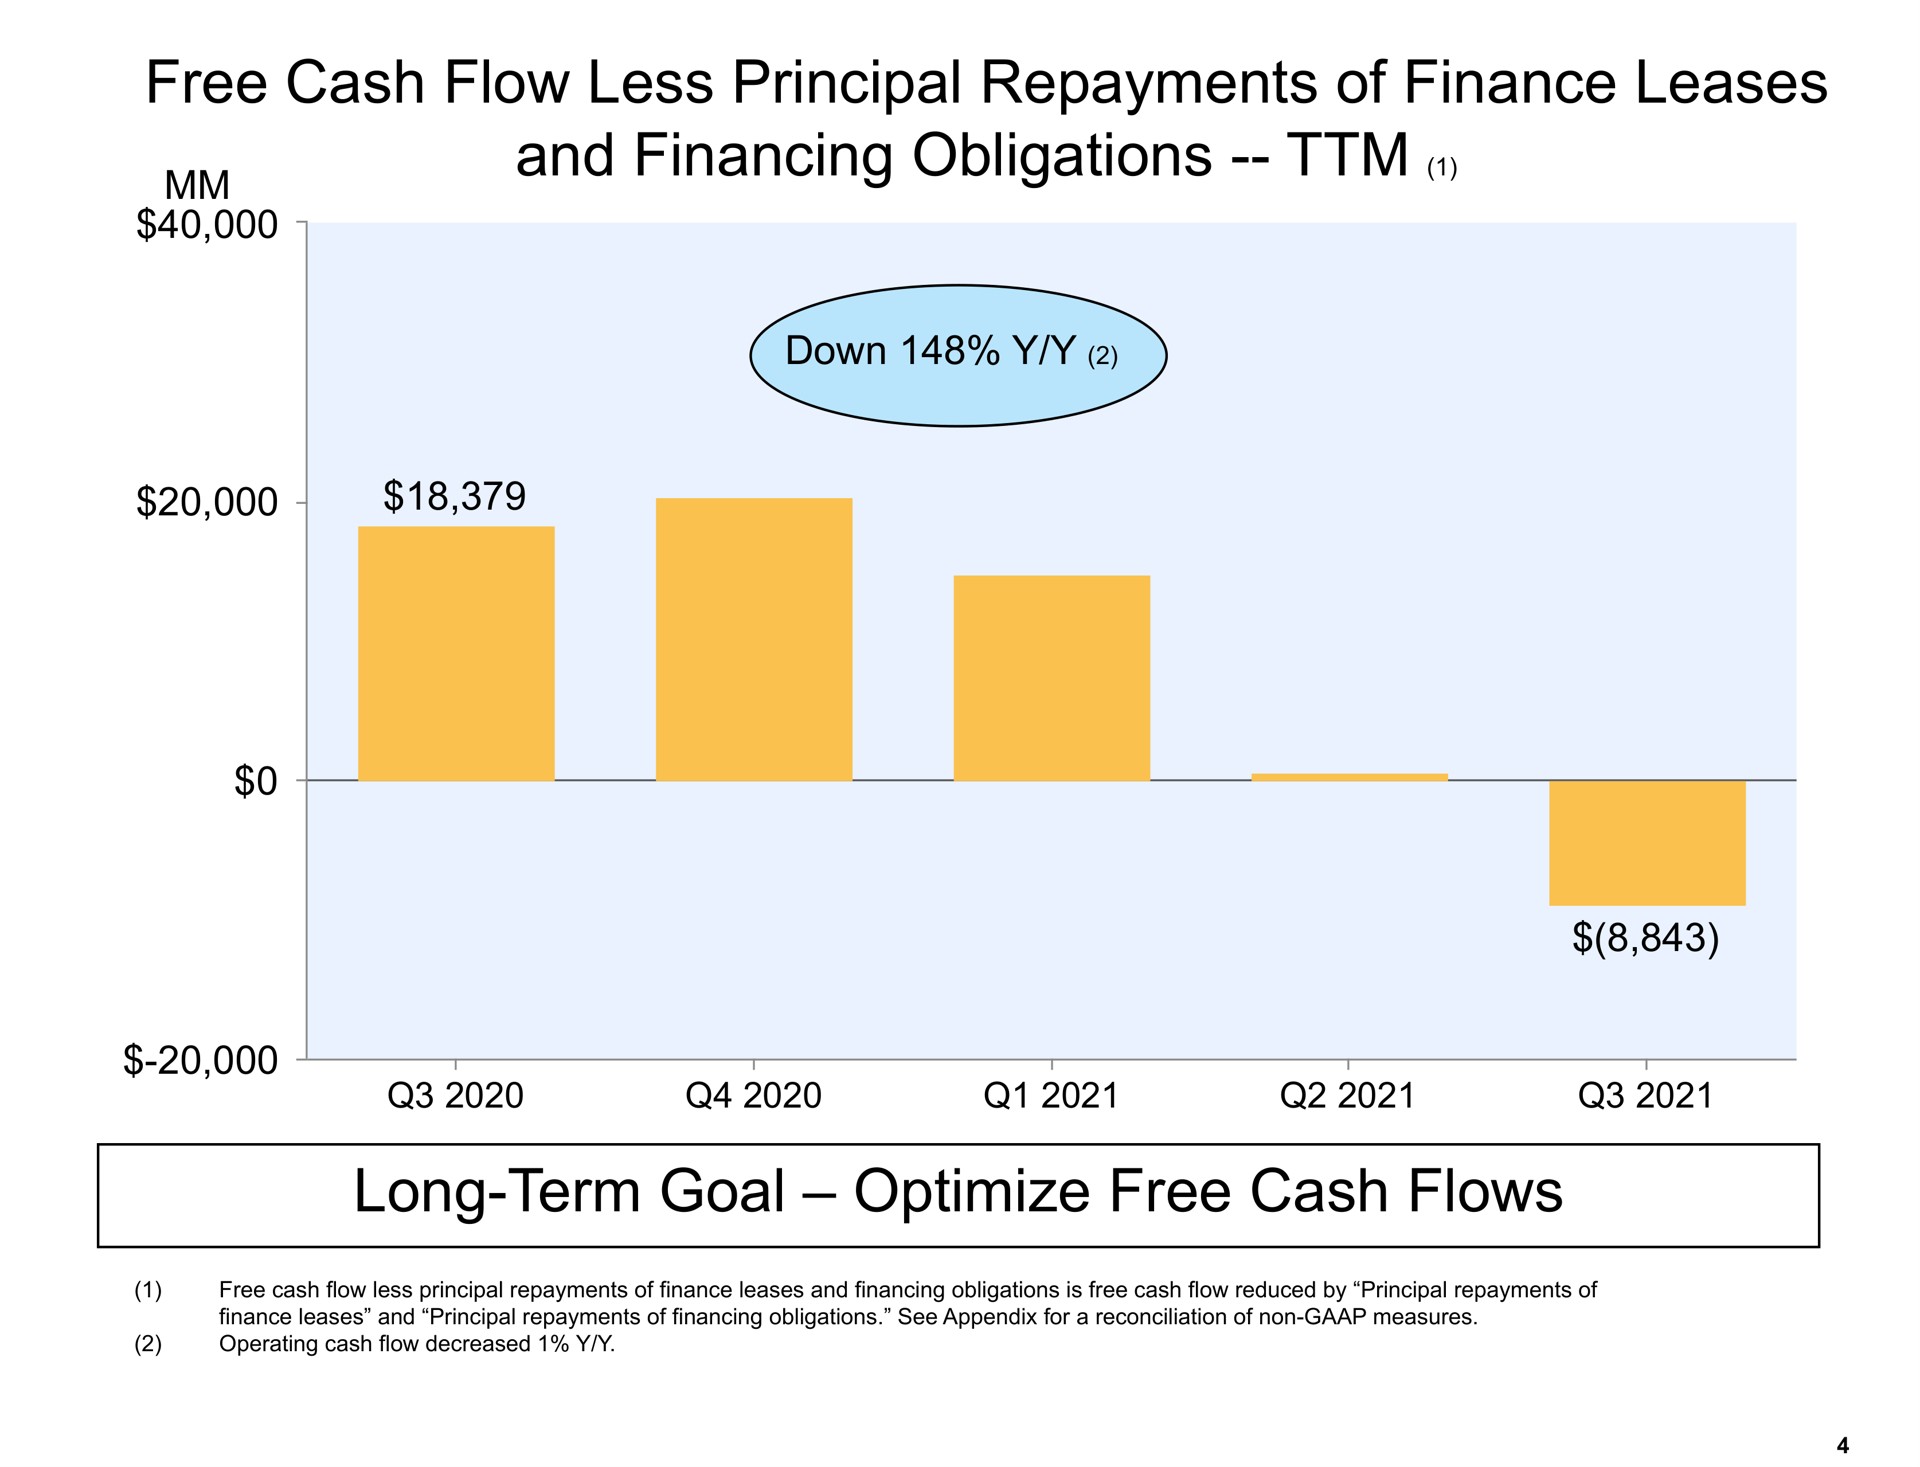 free cash flow less principal repayments of finance leases and financing obligations long term goal optimize free cash flows | Amazon